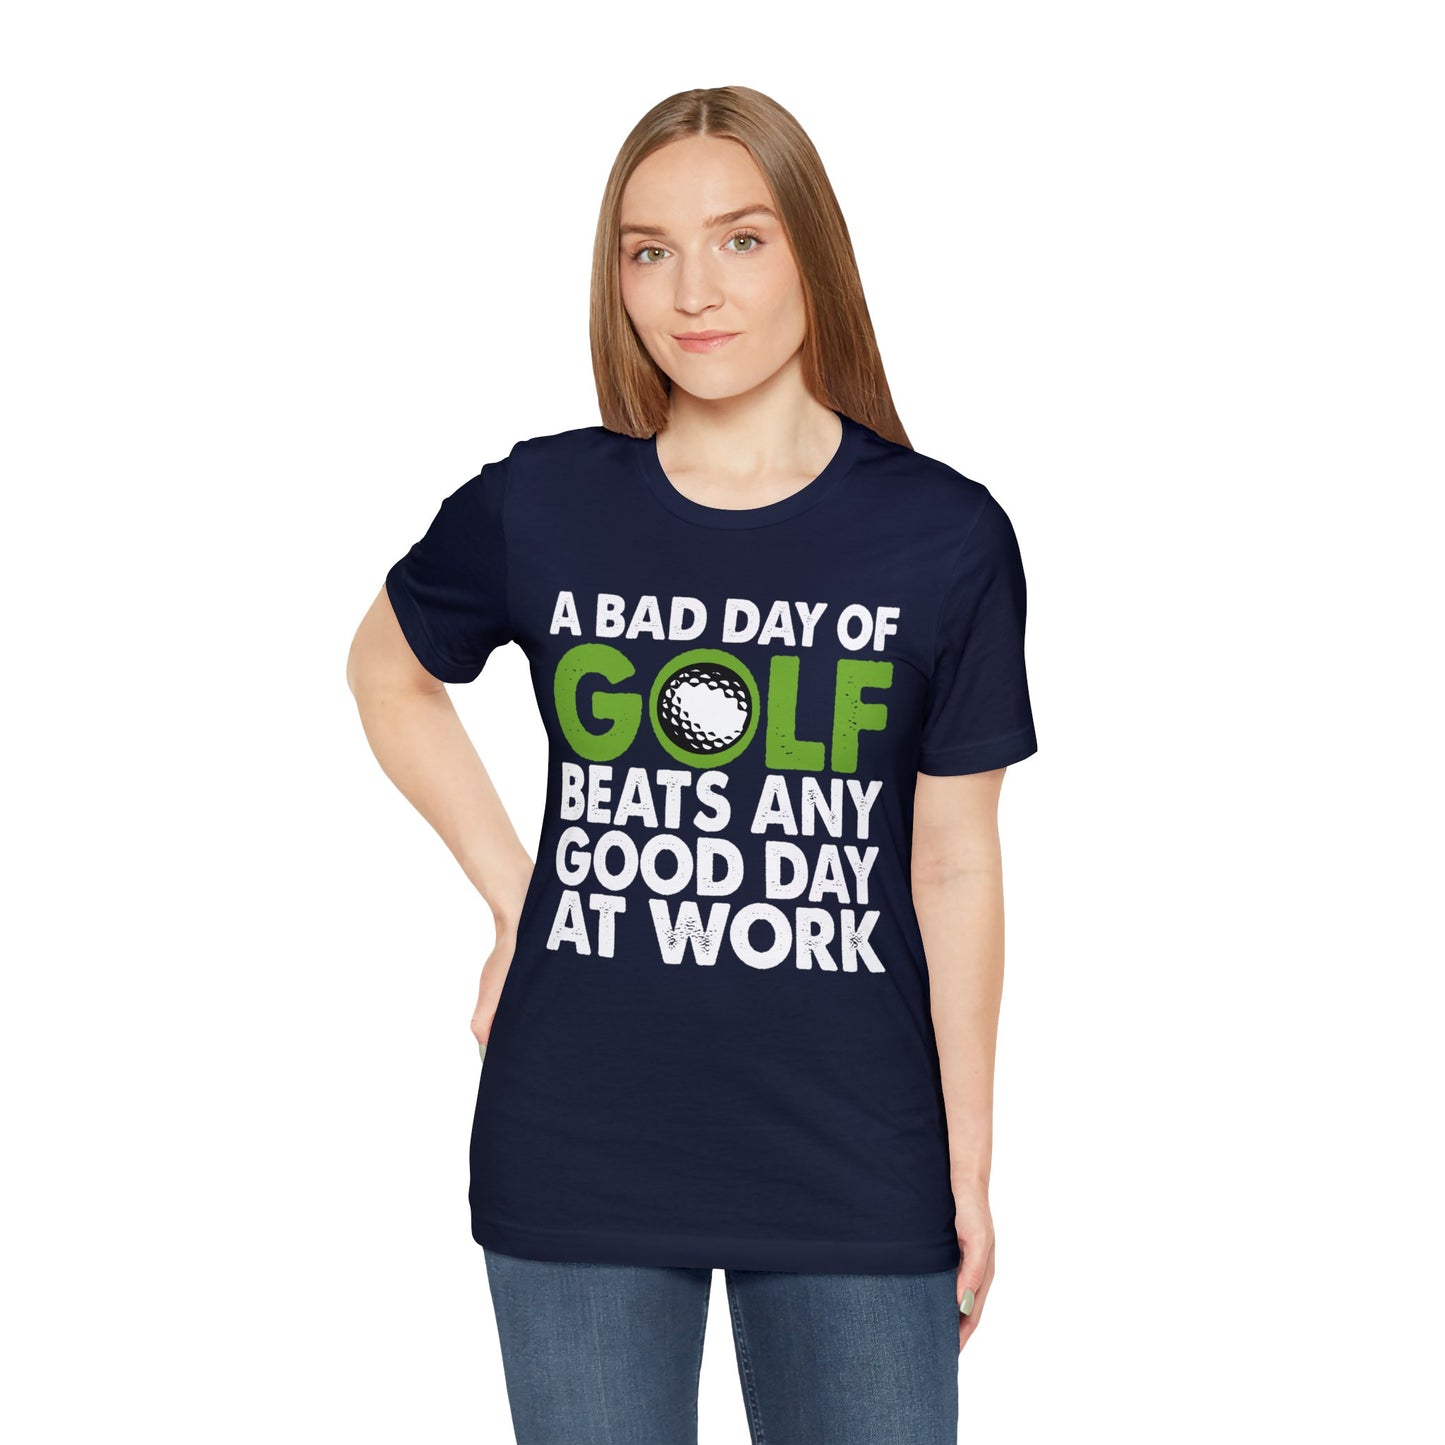 A Bad Day of Golf Beats Any Good Day at Work - Fun and Stylish Golf Enthusiast T-Shirt